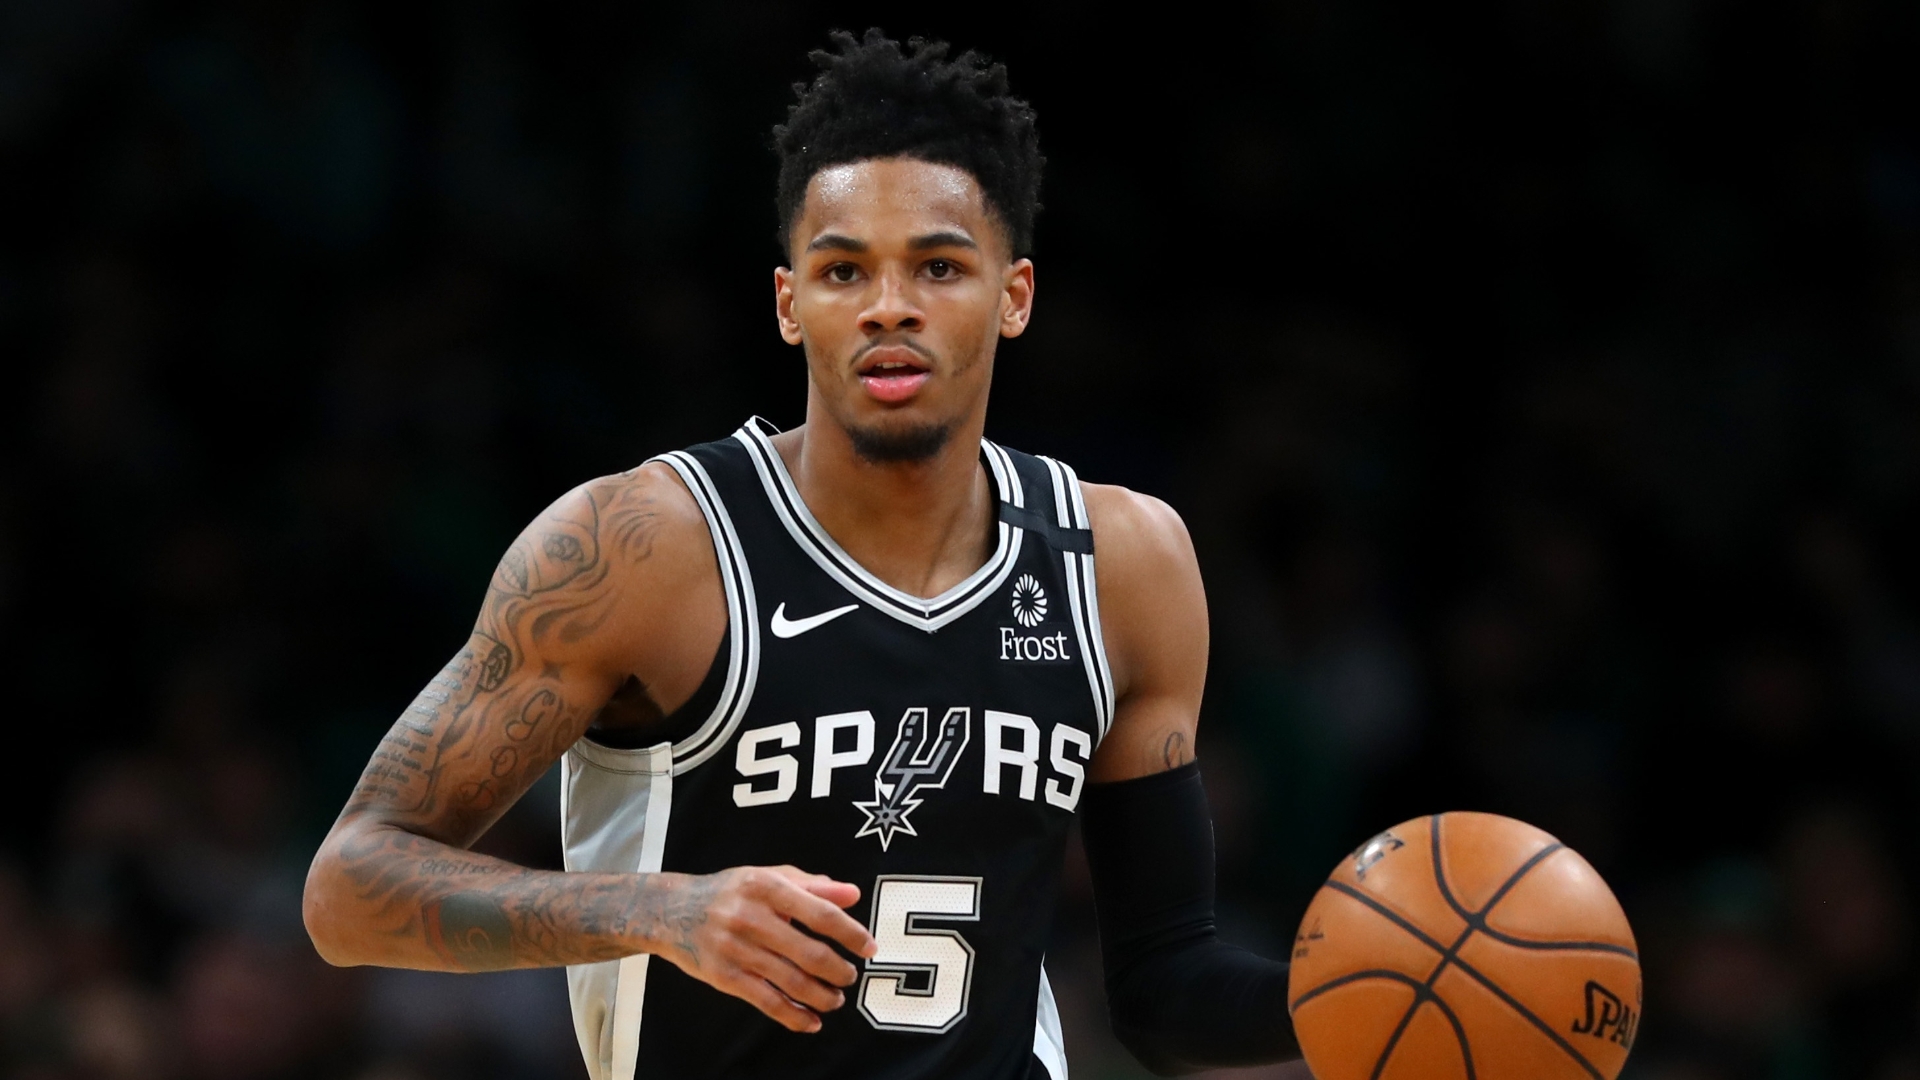 Spurs fans show Dejounte Murray support, buy all the New Balance shoes